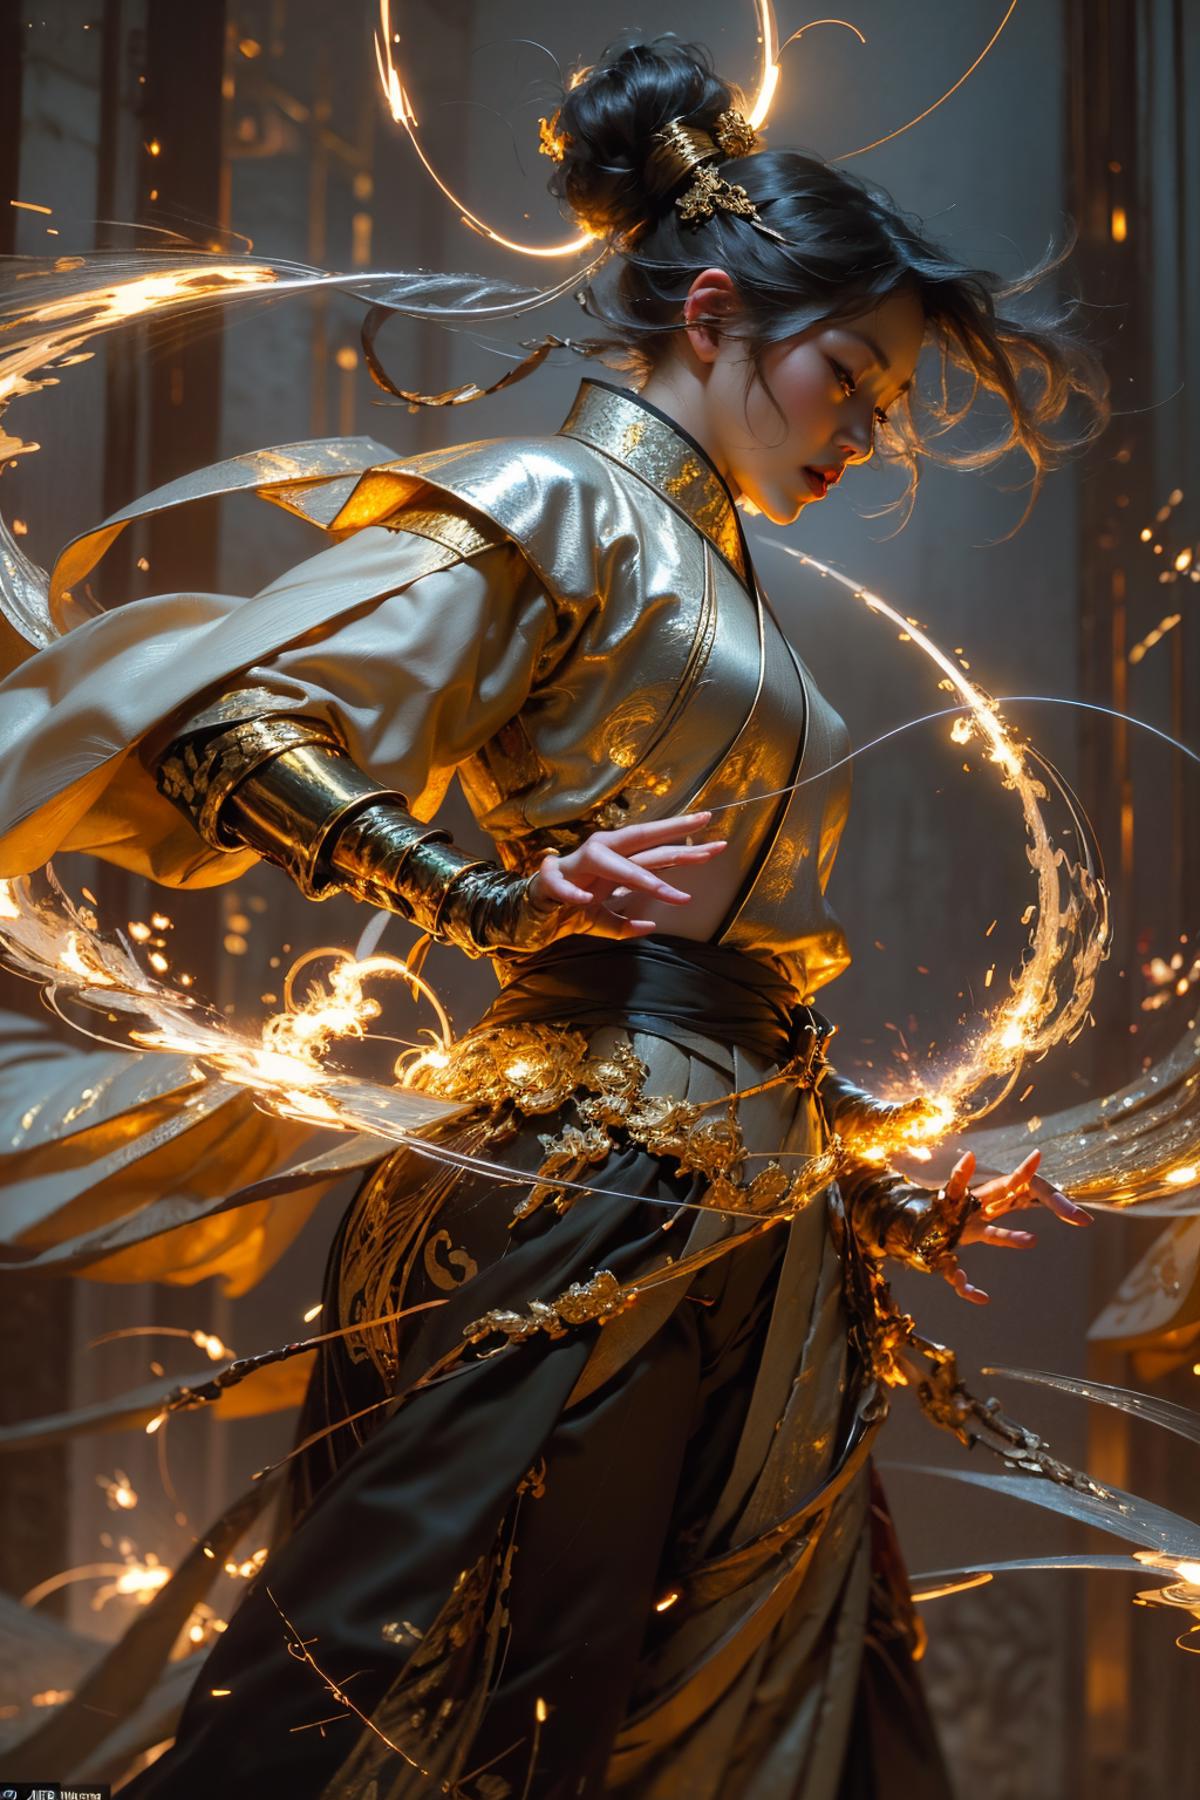 A woman in gold and white with a swirling background of gold and white sparks, possibly an anime or fantasy artwork.